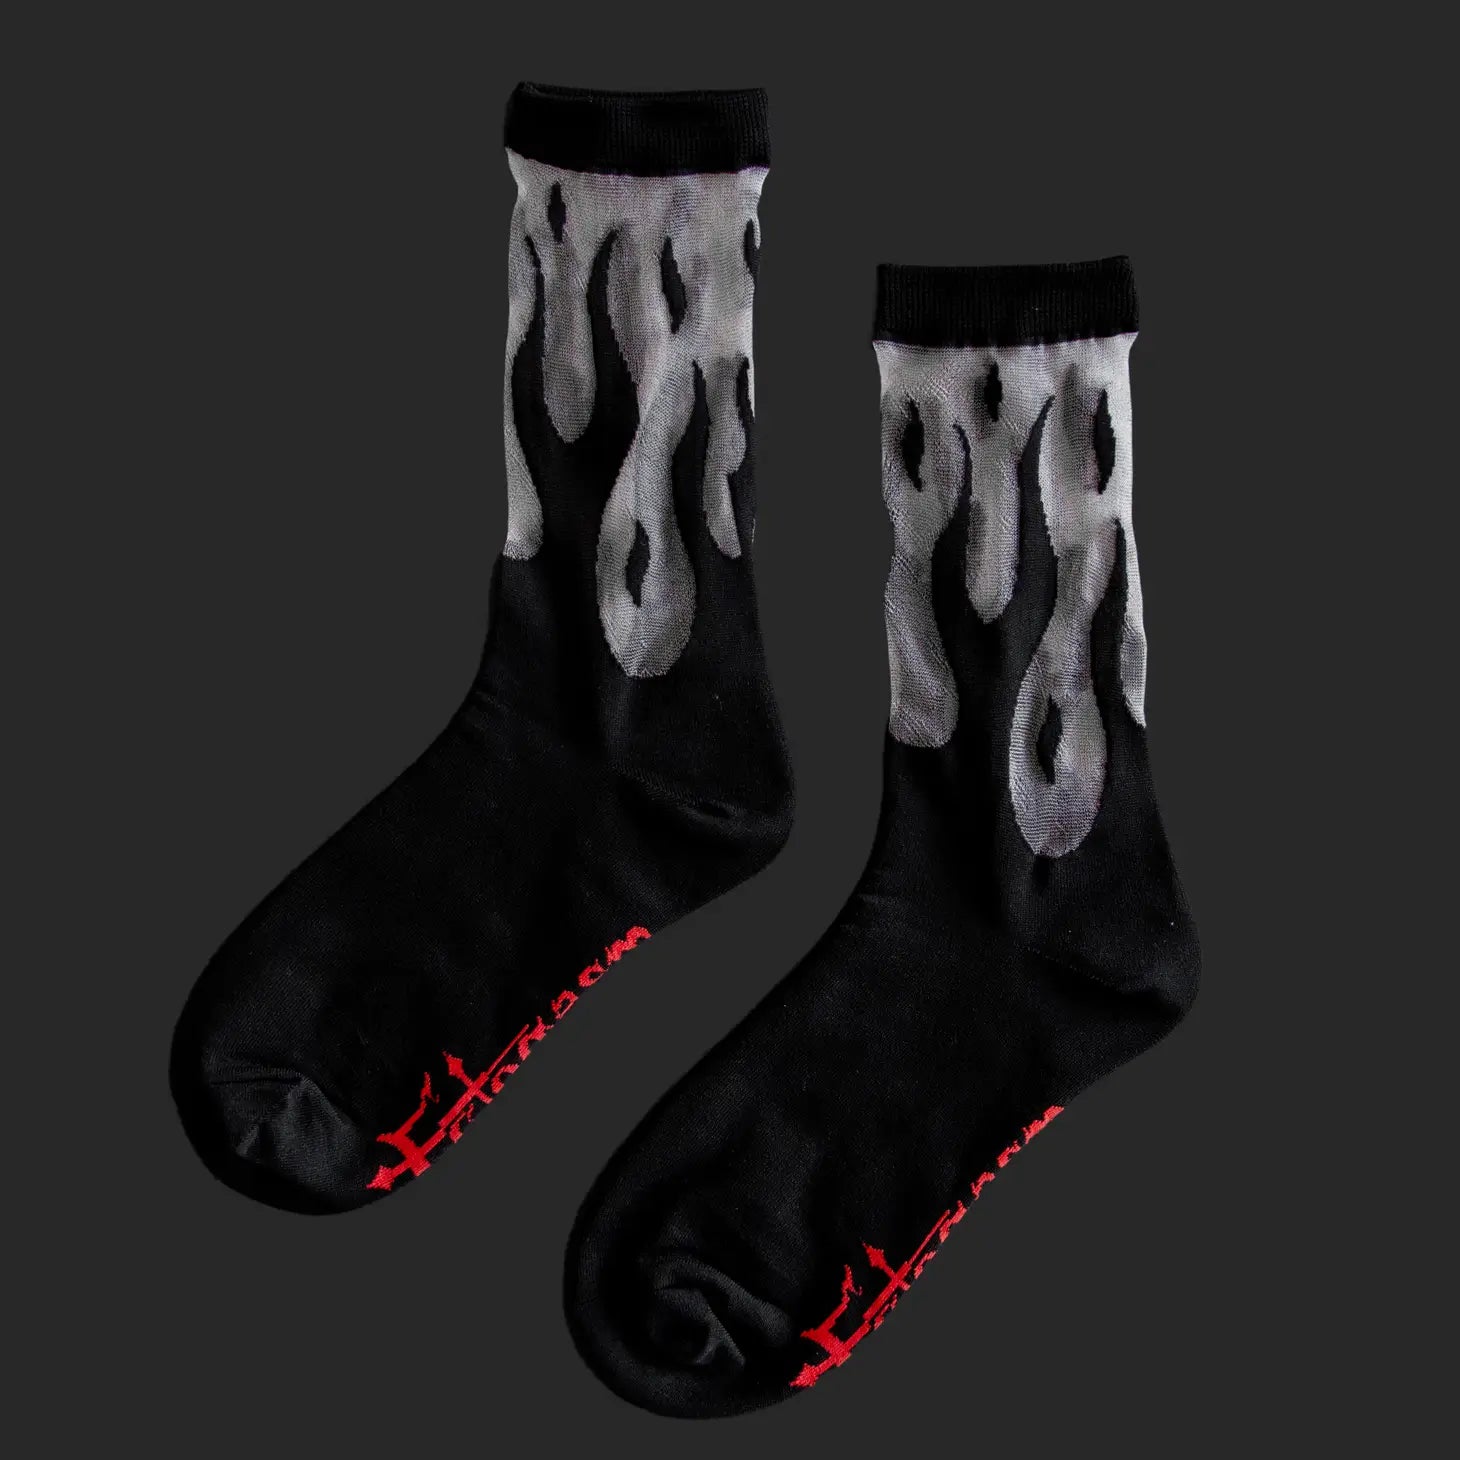 A pair of crew socks with a black flame design & a black cuff, toe, and heel and the Ectogasm logo woven onto the bottom of each sole